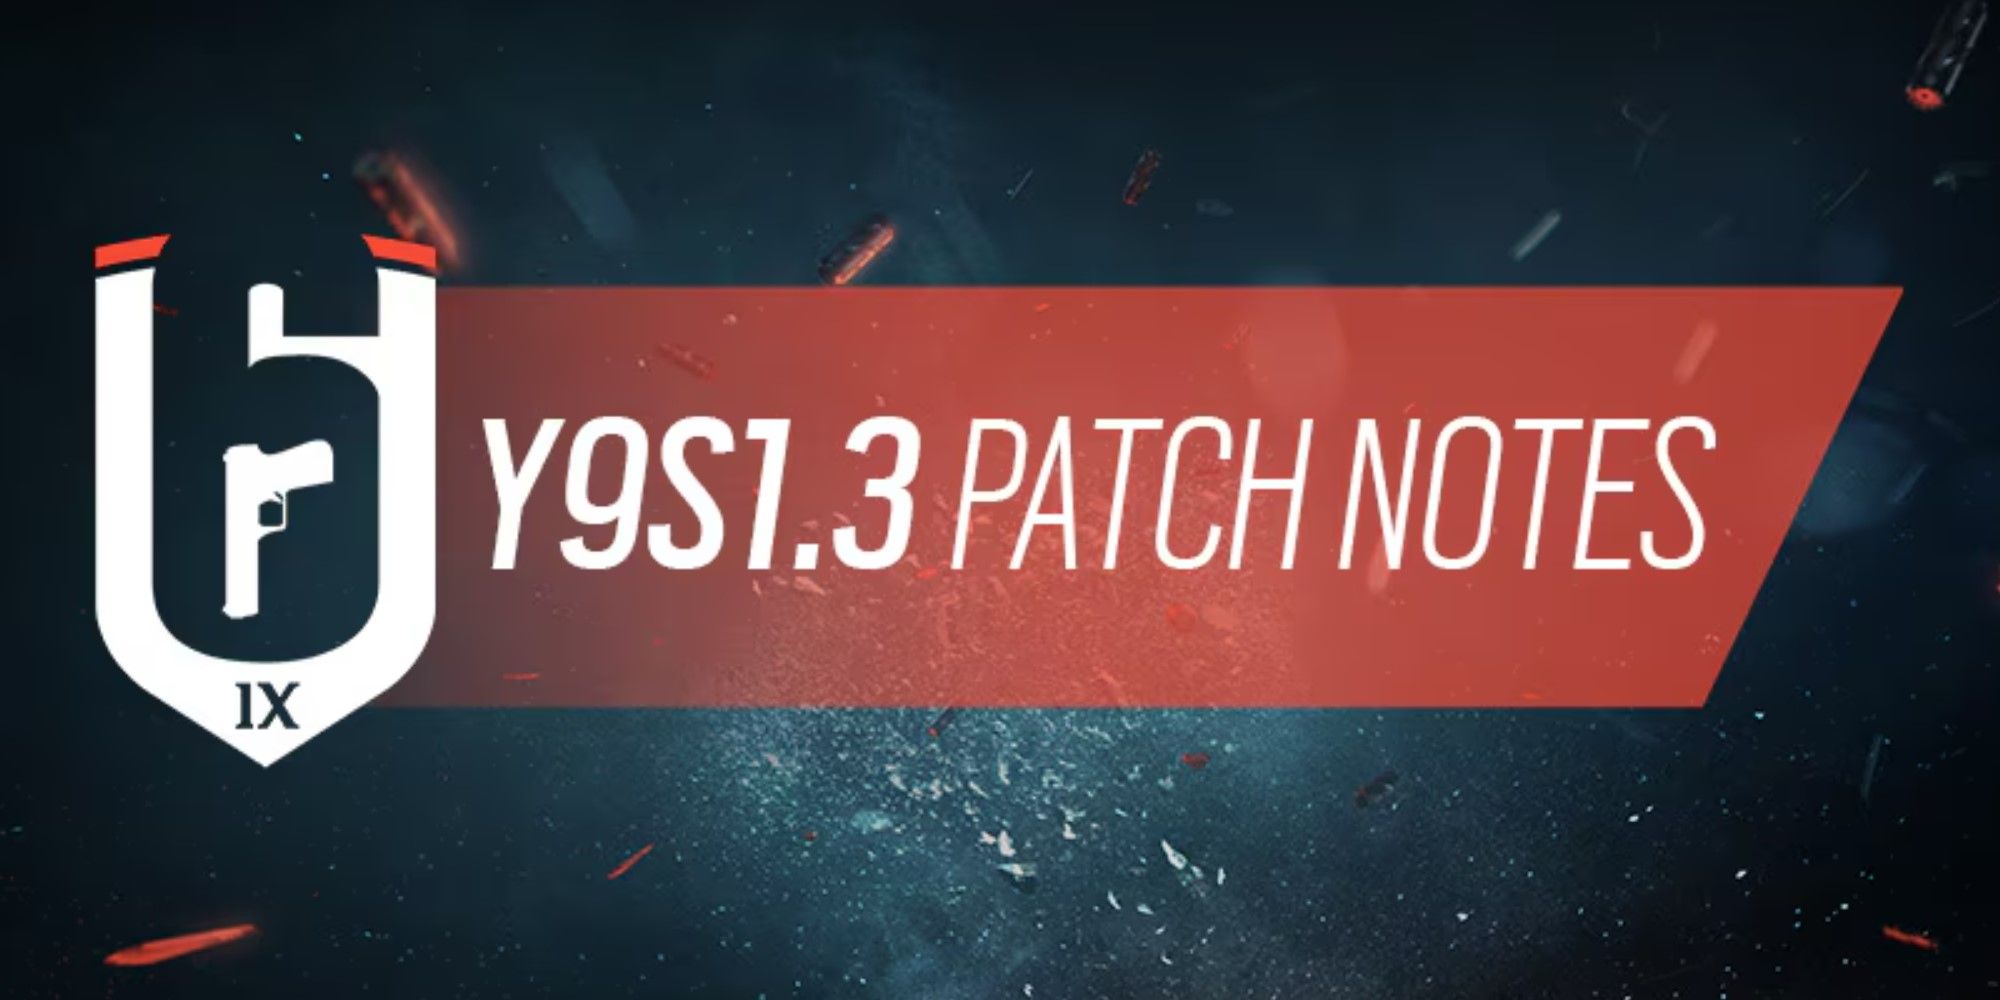 siege patch notes